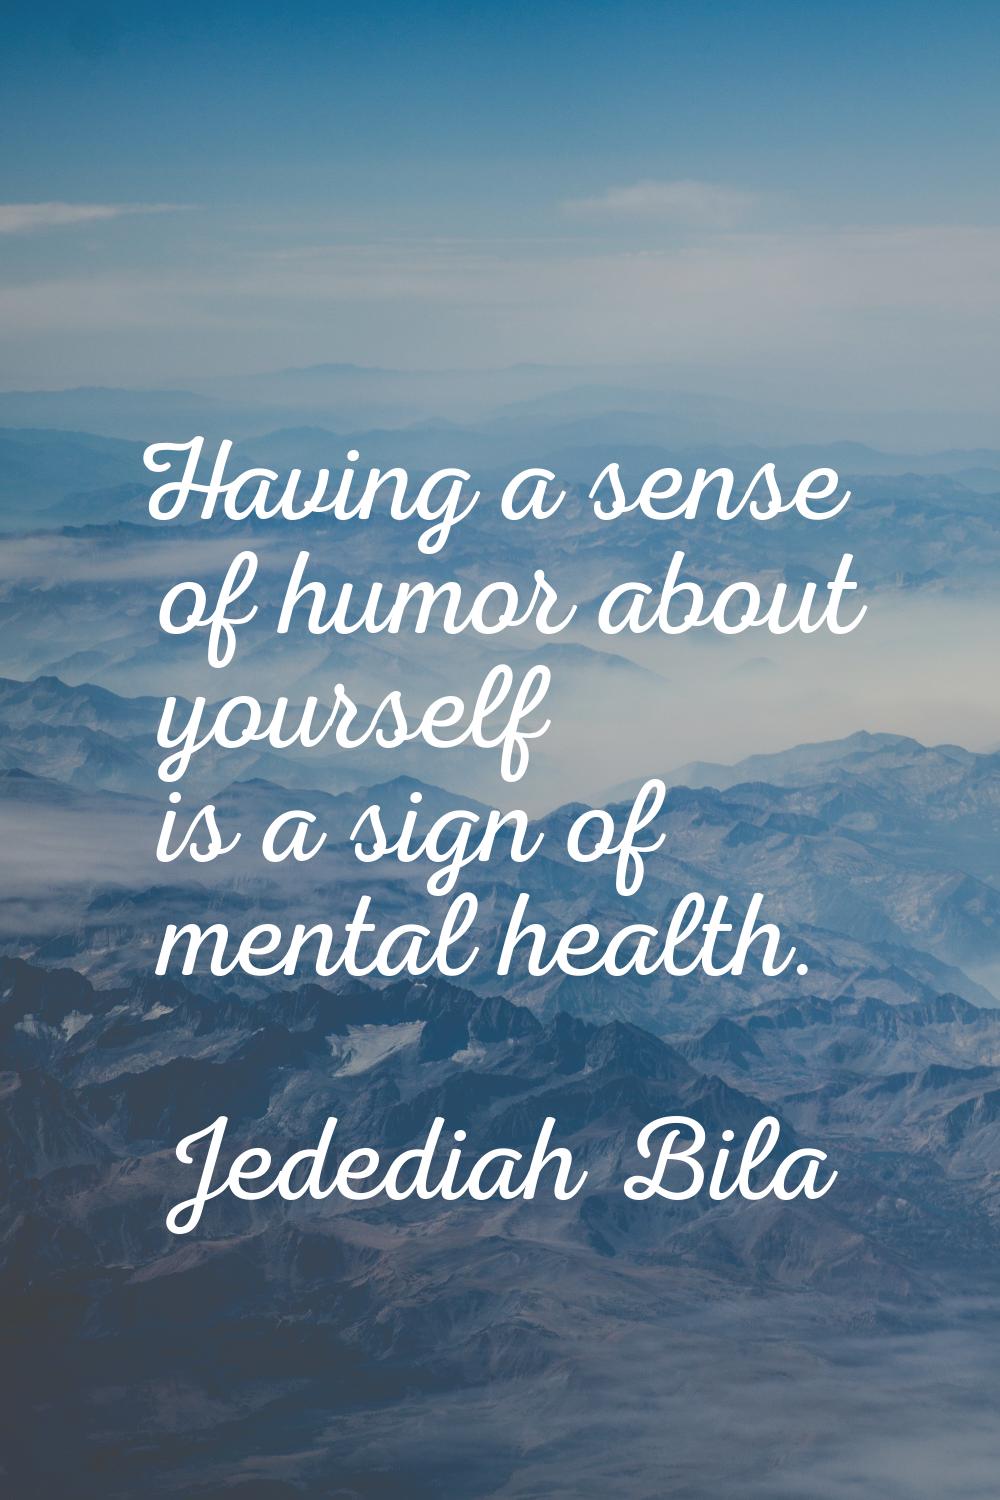 Having a sense of humor about yourself is a sign of mental health.